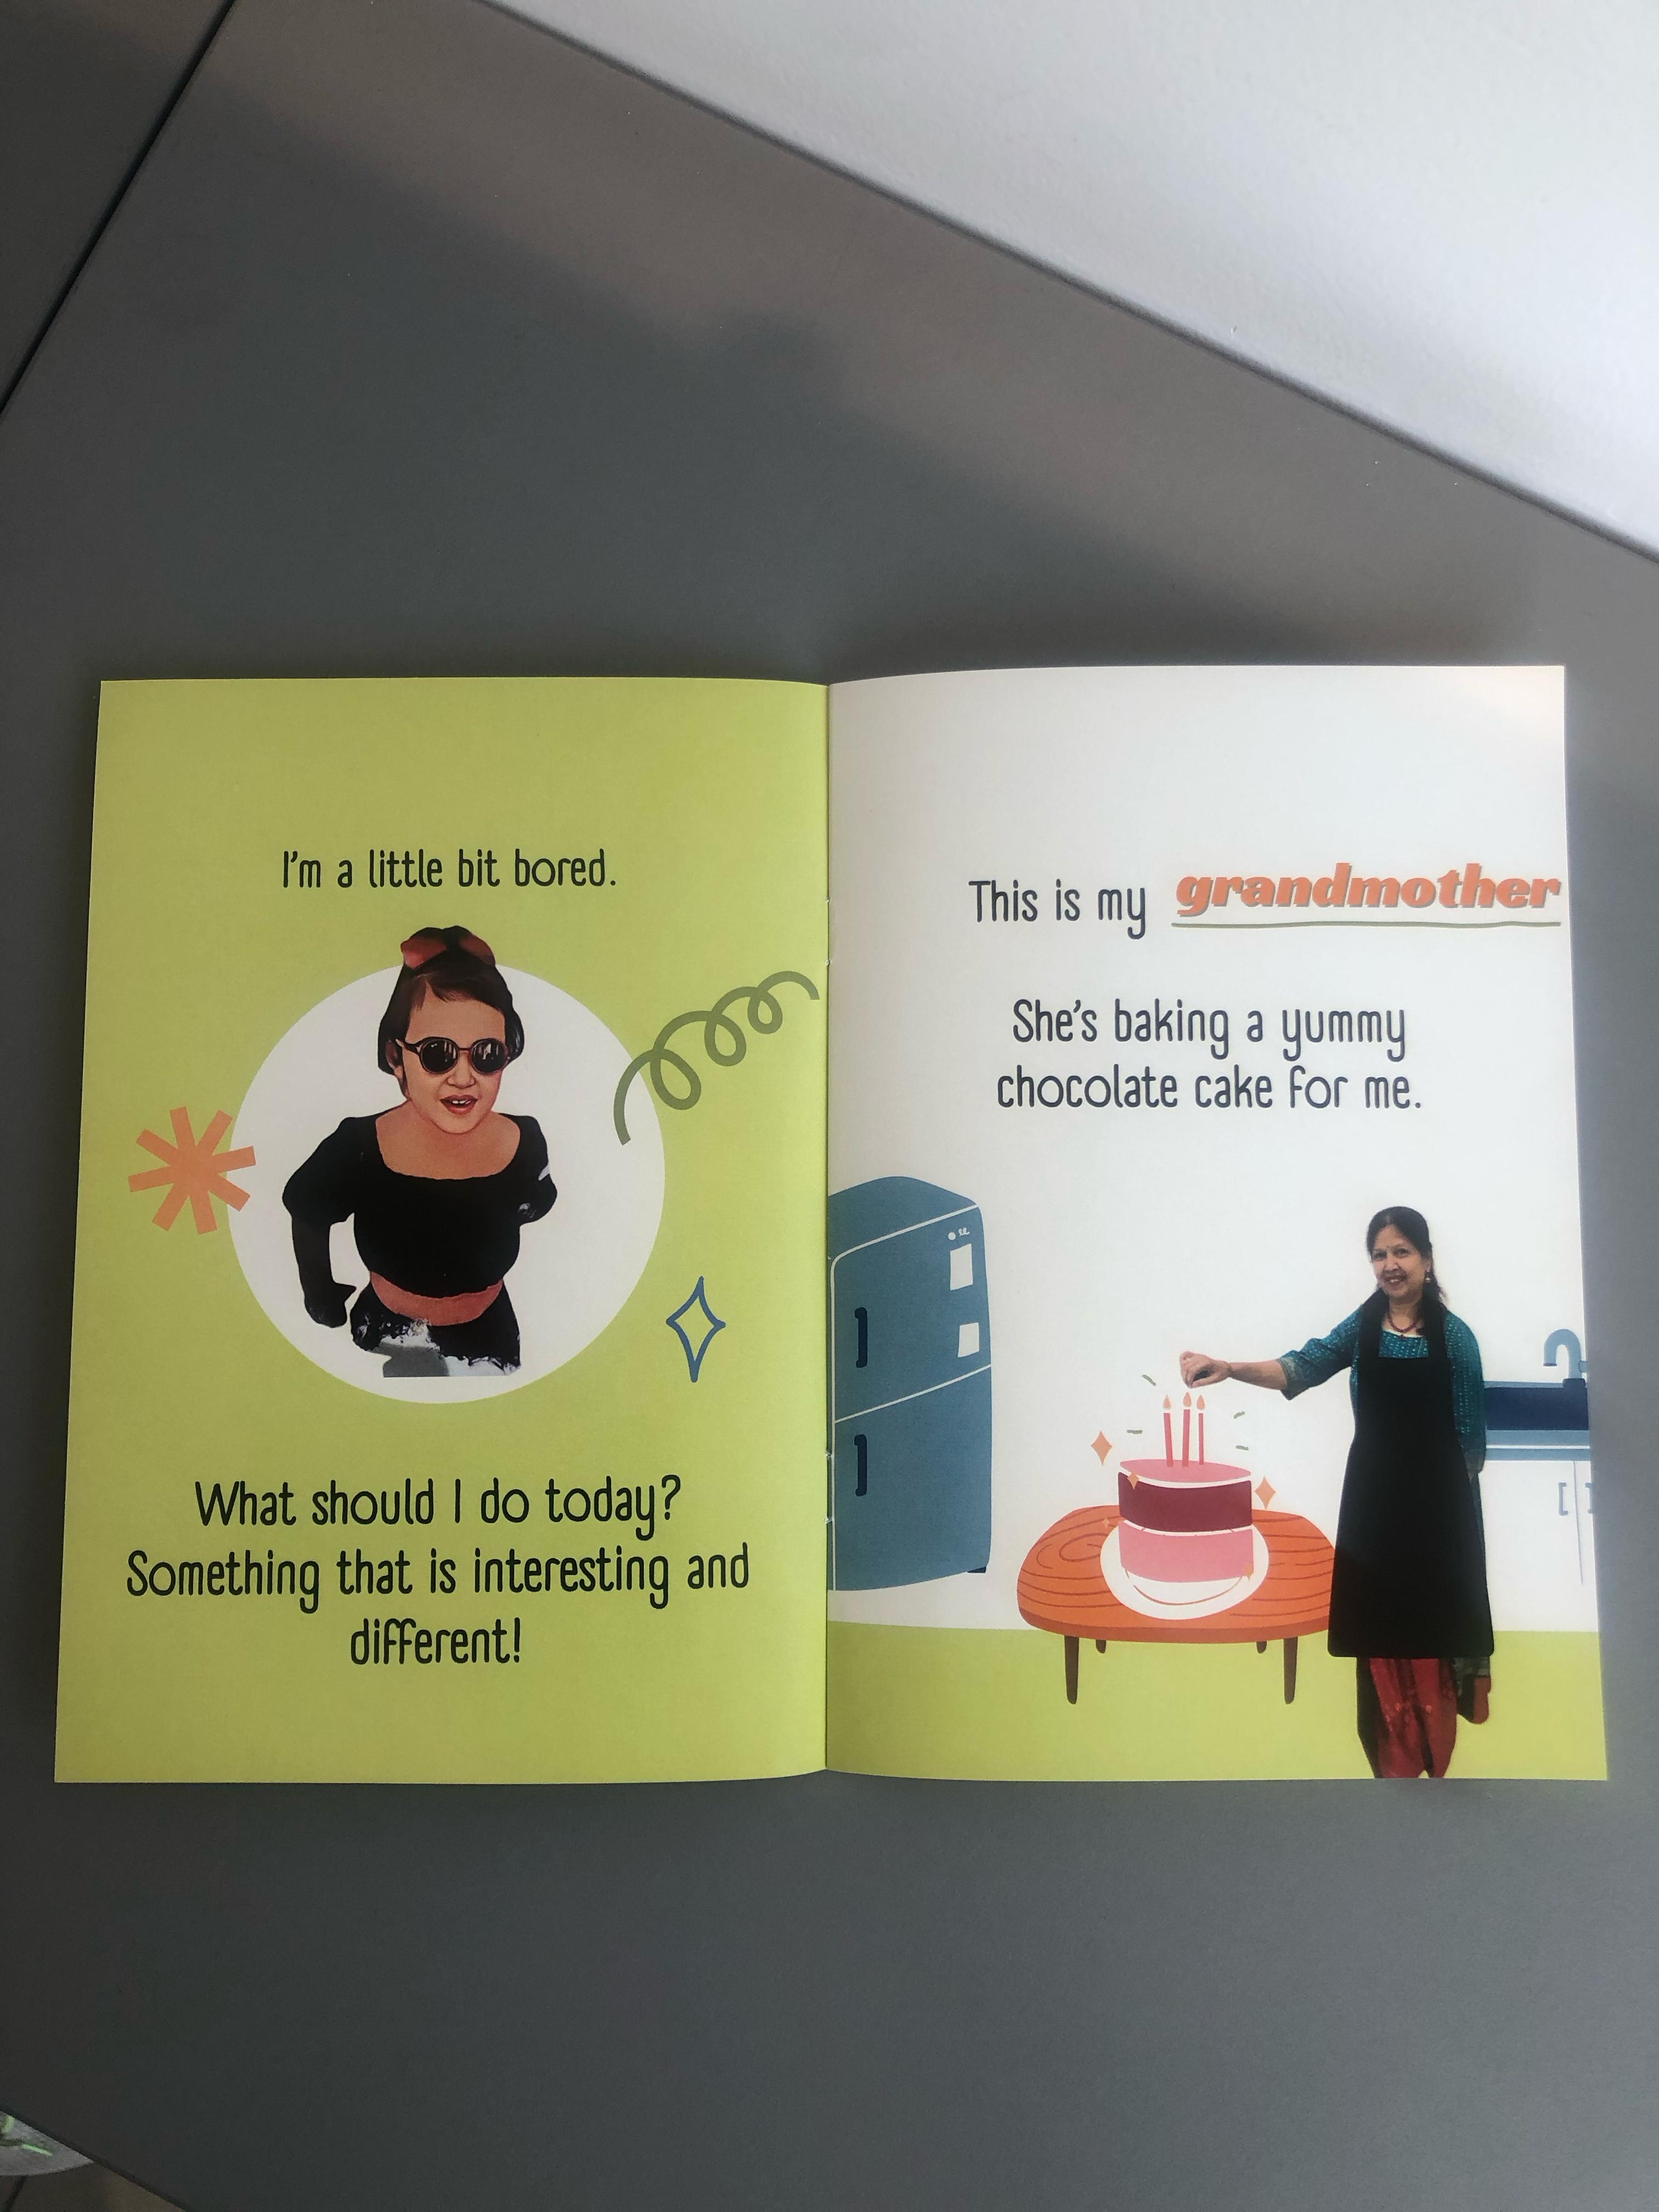 Customised Paperback books with customised pictures and names, this book is made specially for you and your child. The main characters are you and your family, and the story is based on your inputs. It’s a fun way to surprise children with a book that revolves around them.